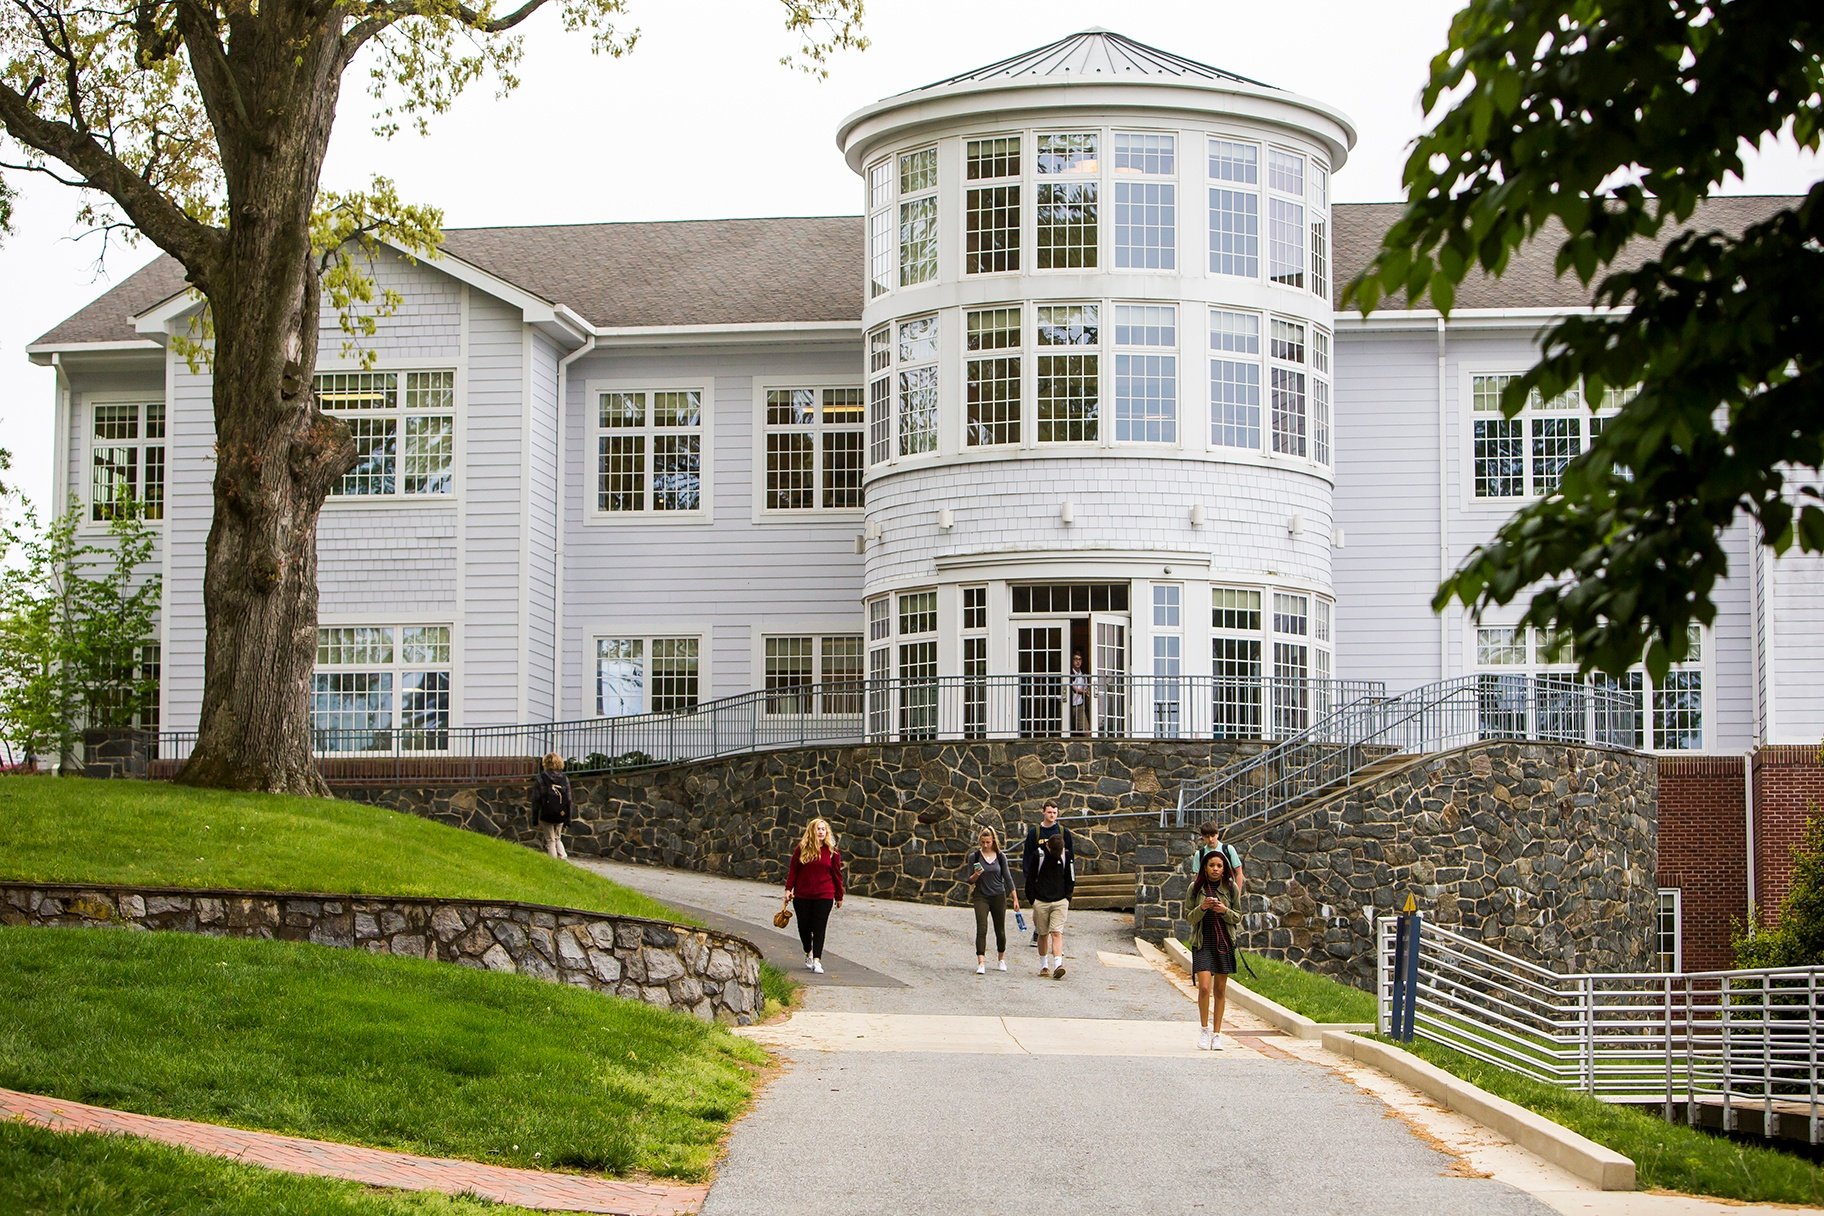 The Beginner’s Guide to Private School Open Houses